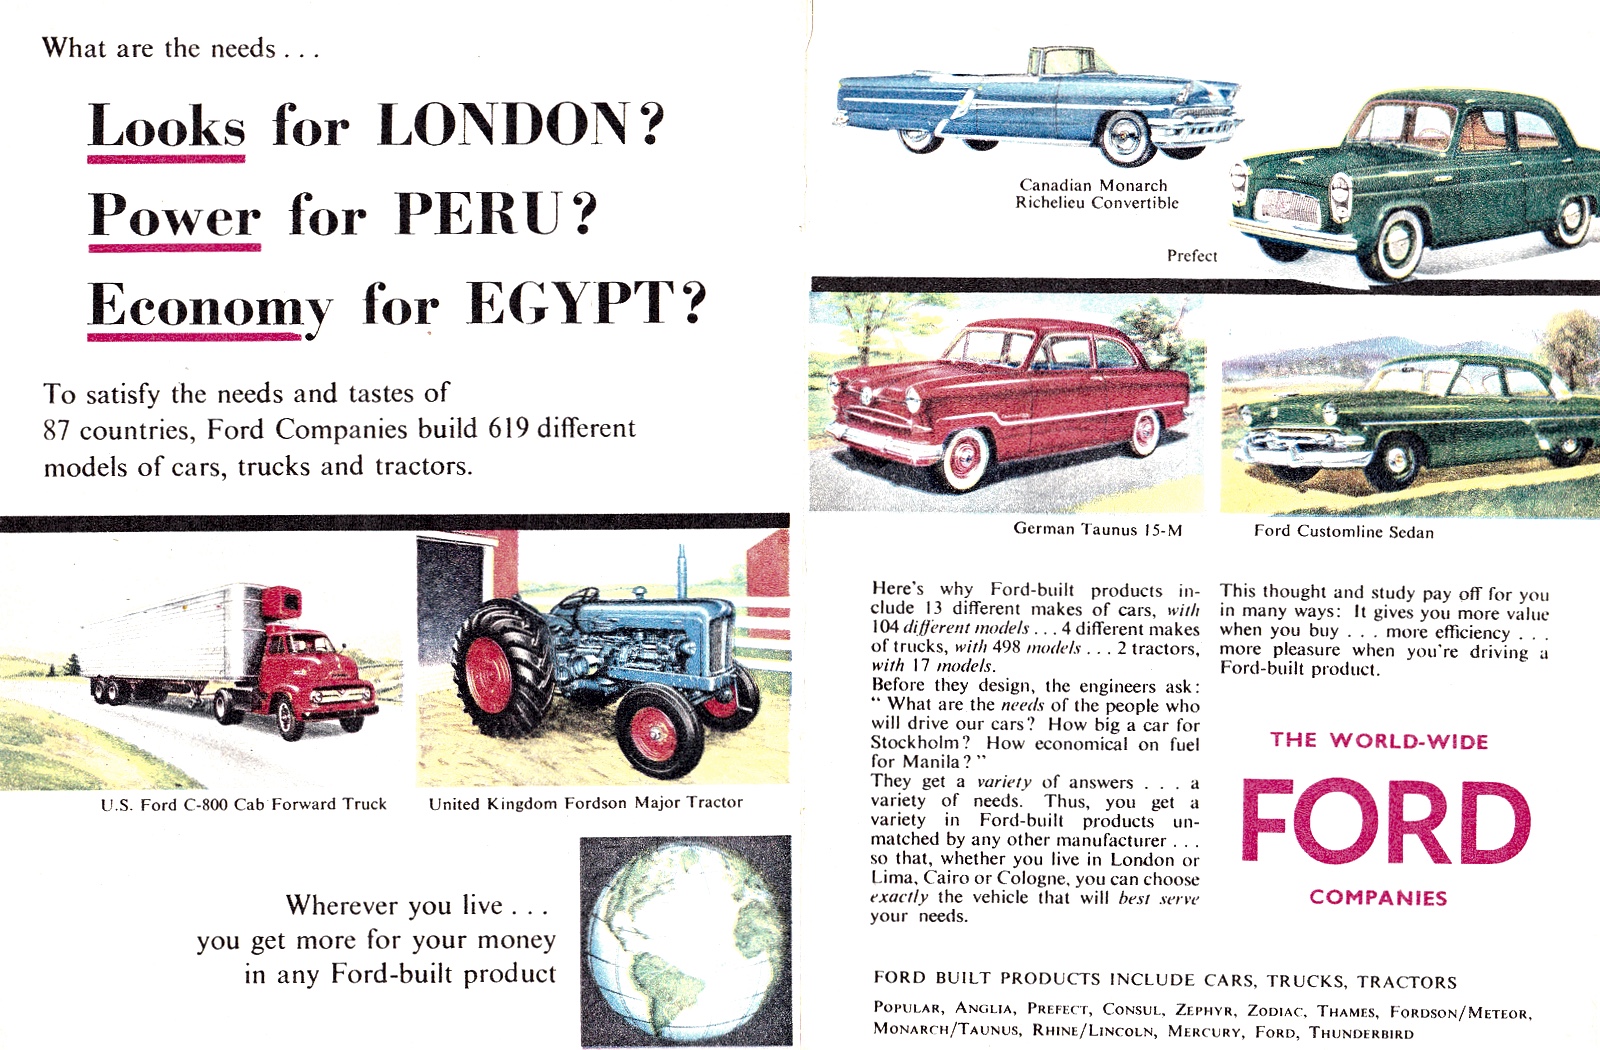 1955 World Wide Fords Cars Trucks Tractors